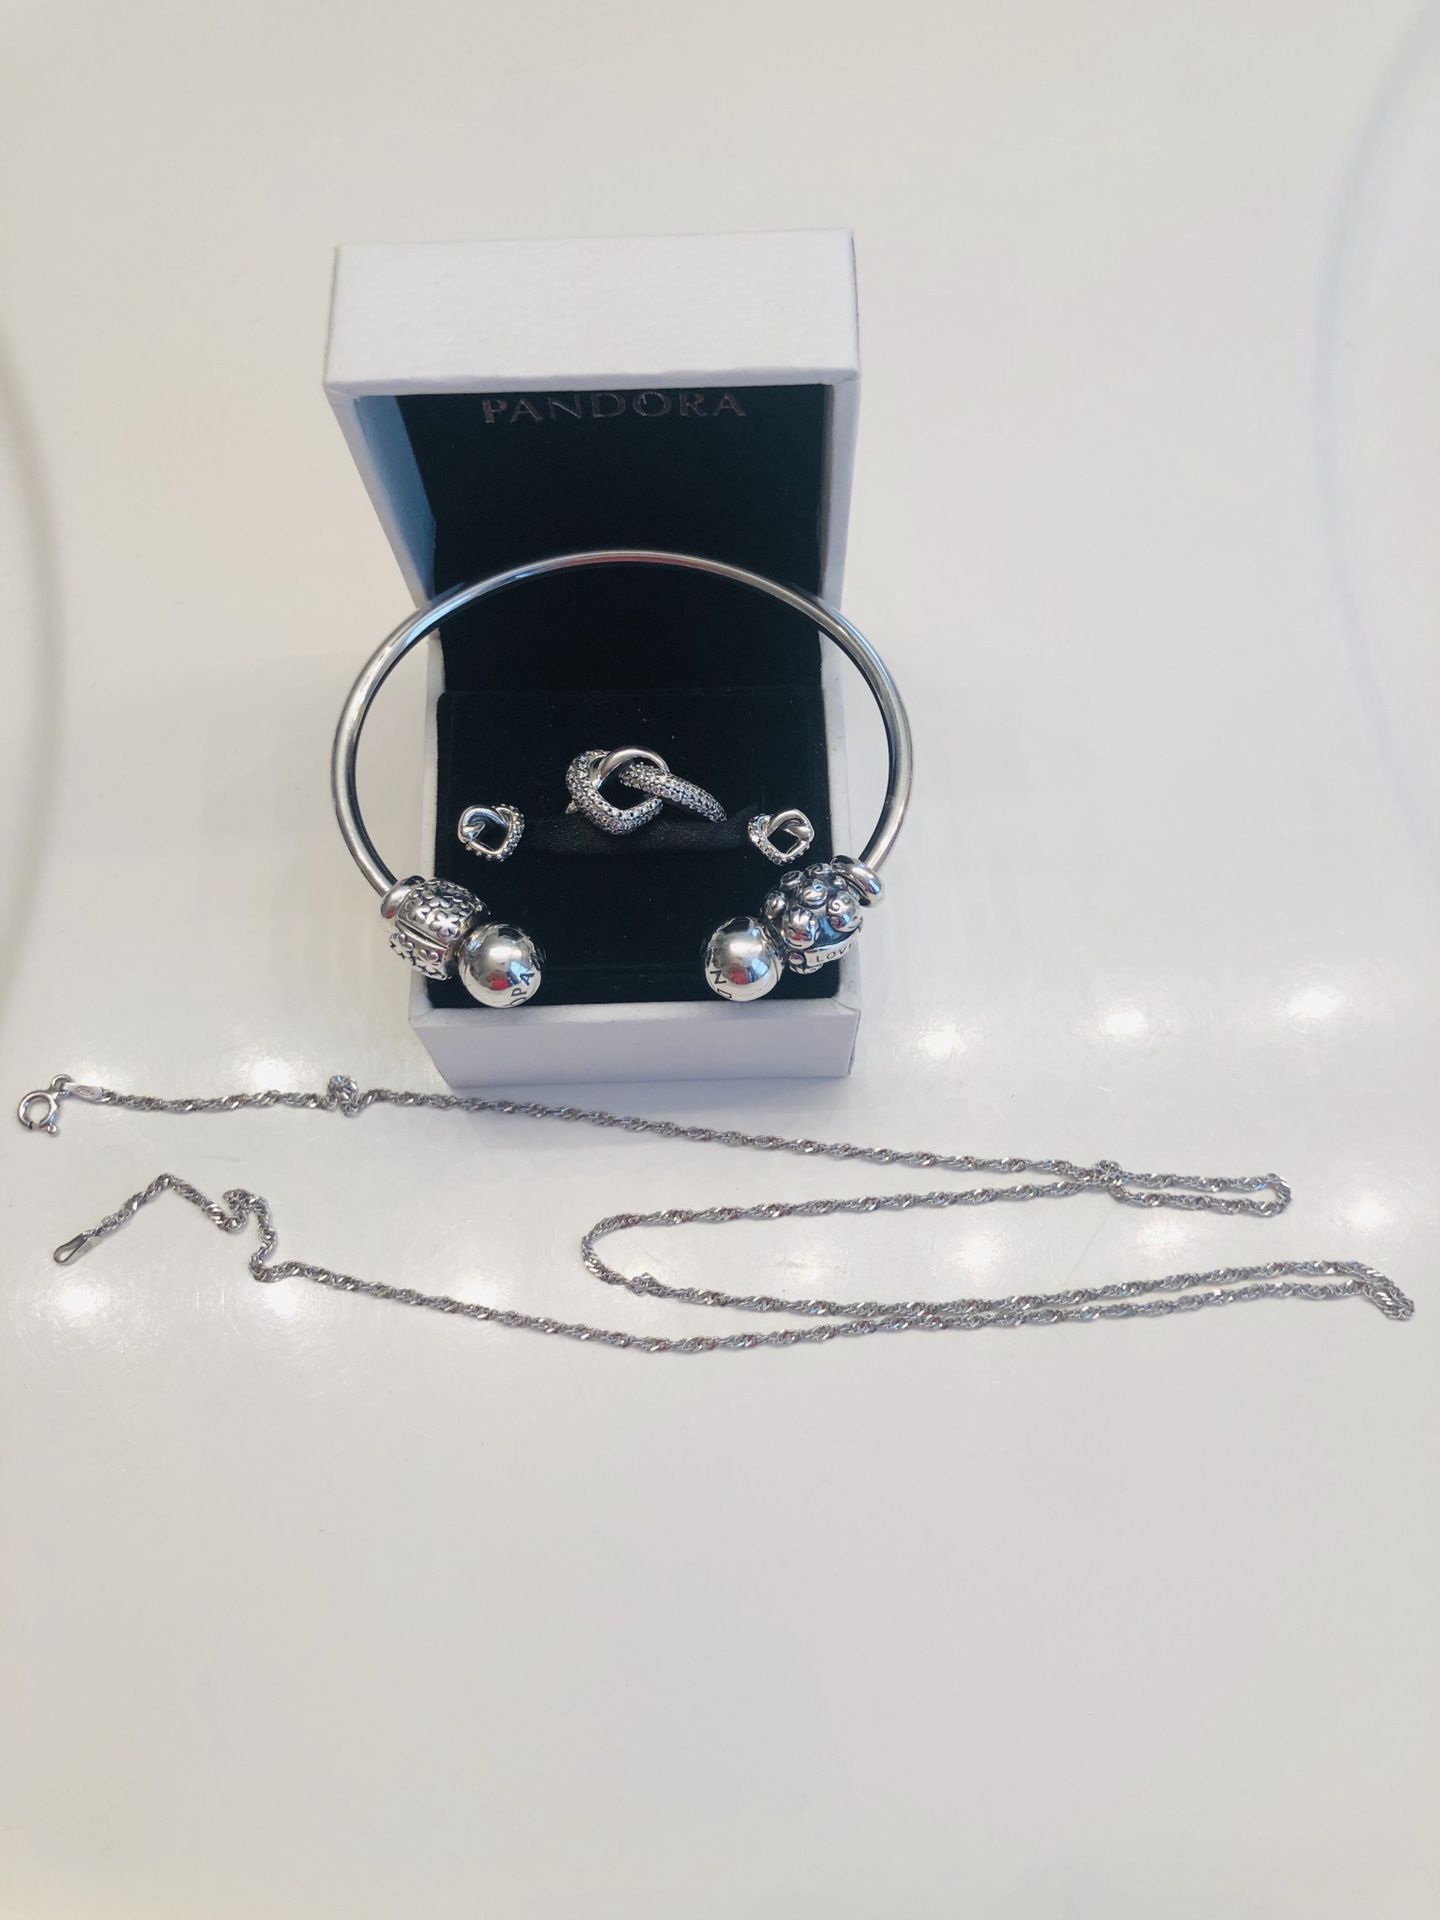 925 sterling silver pandora with charms earrings, ring size 5 with chain